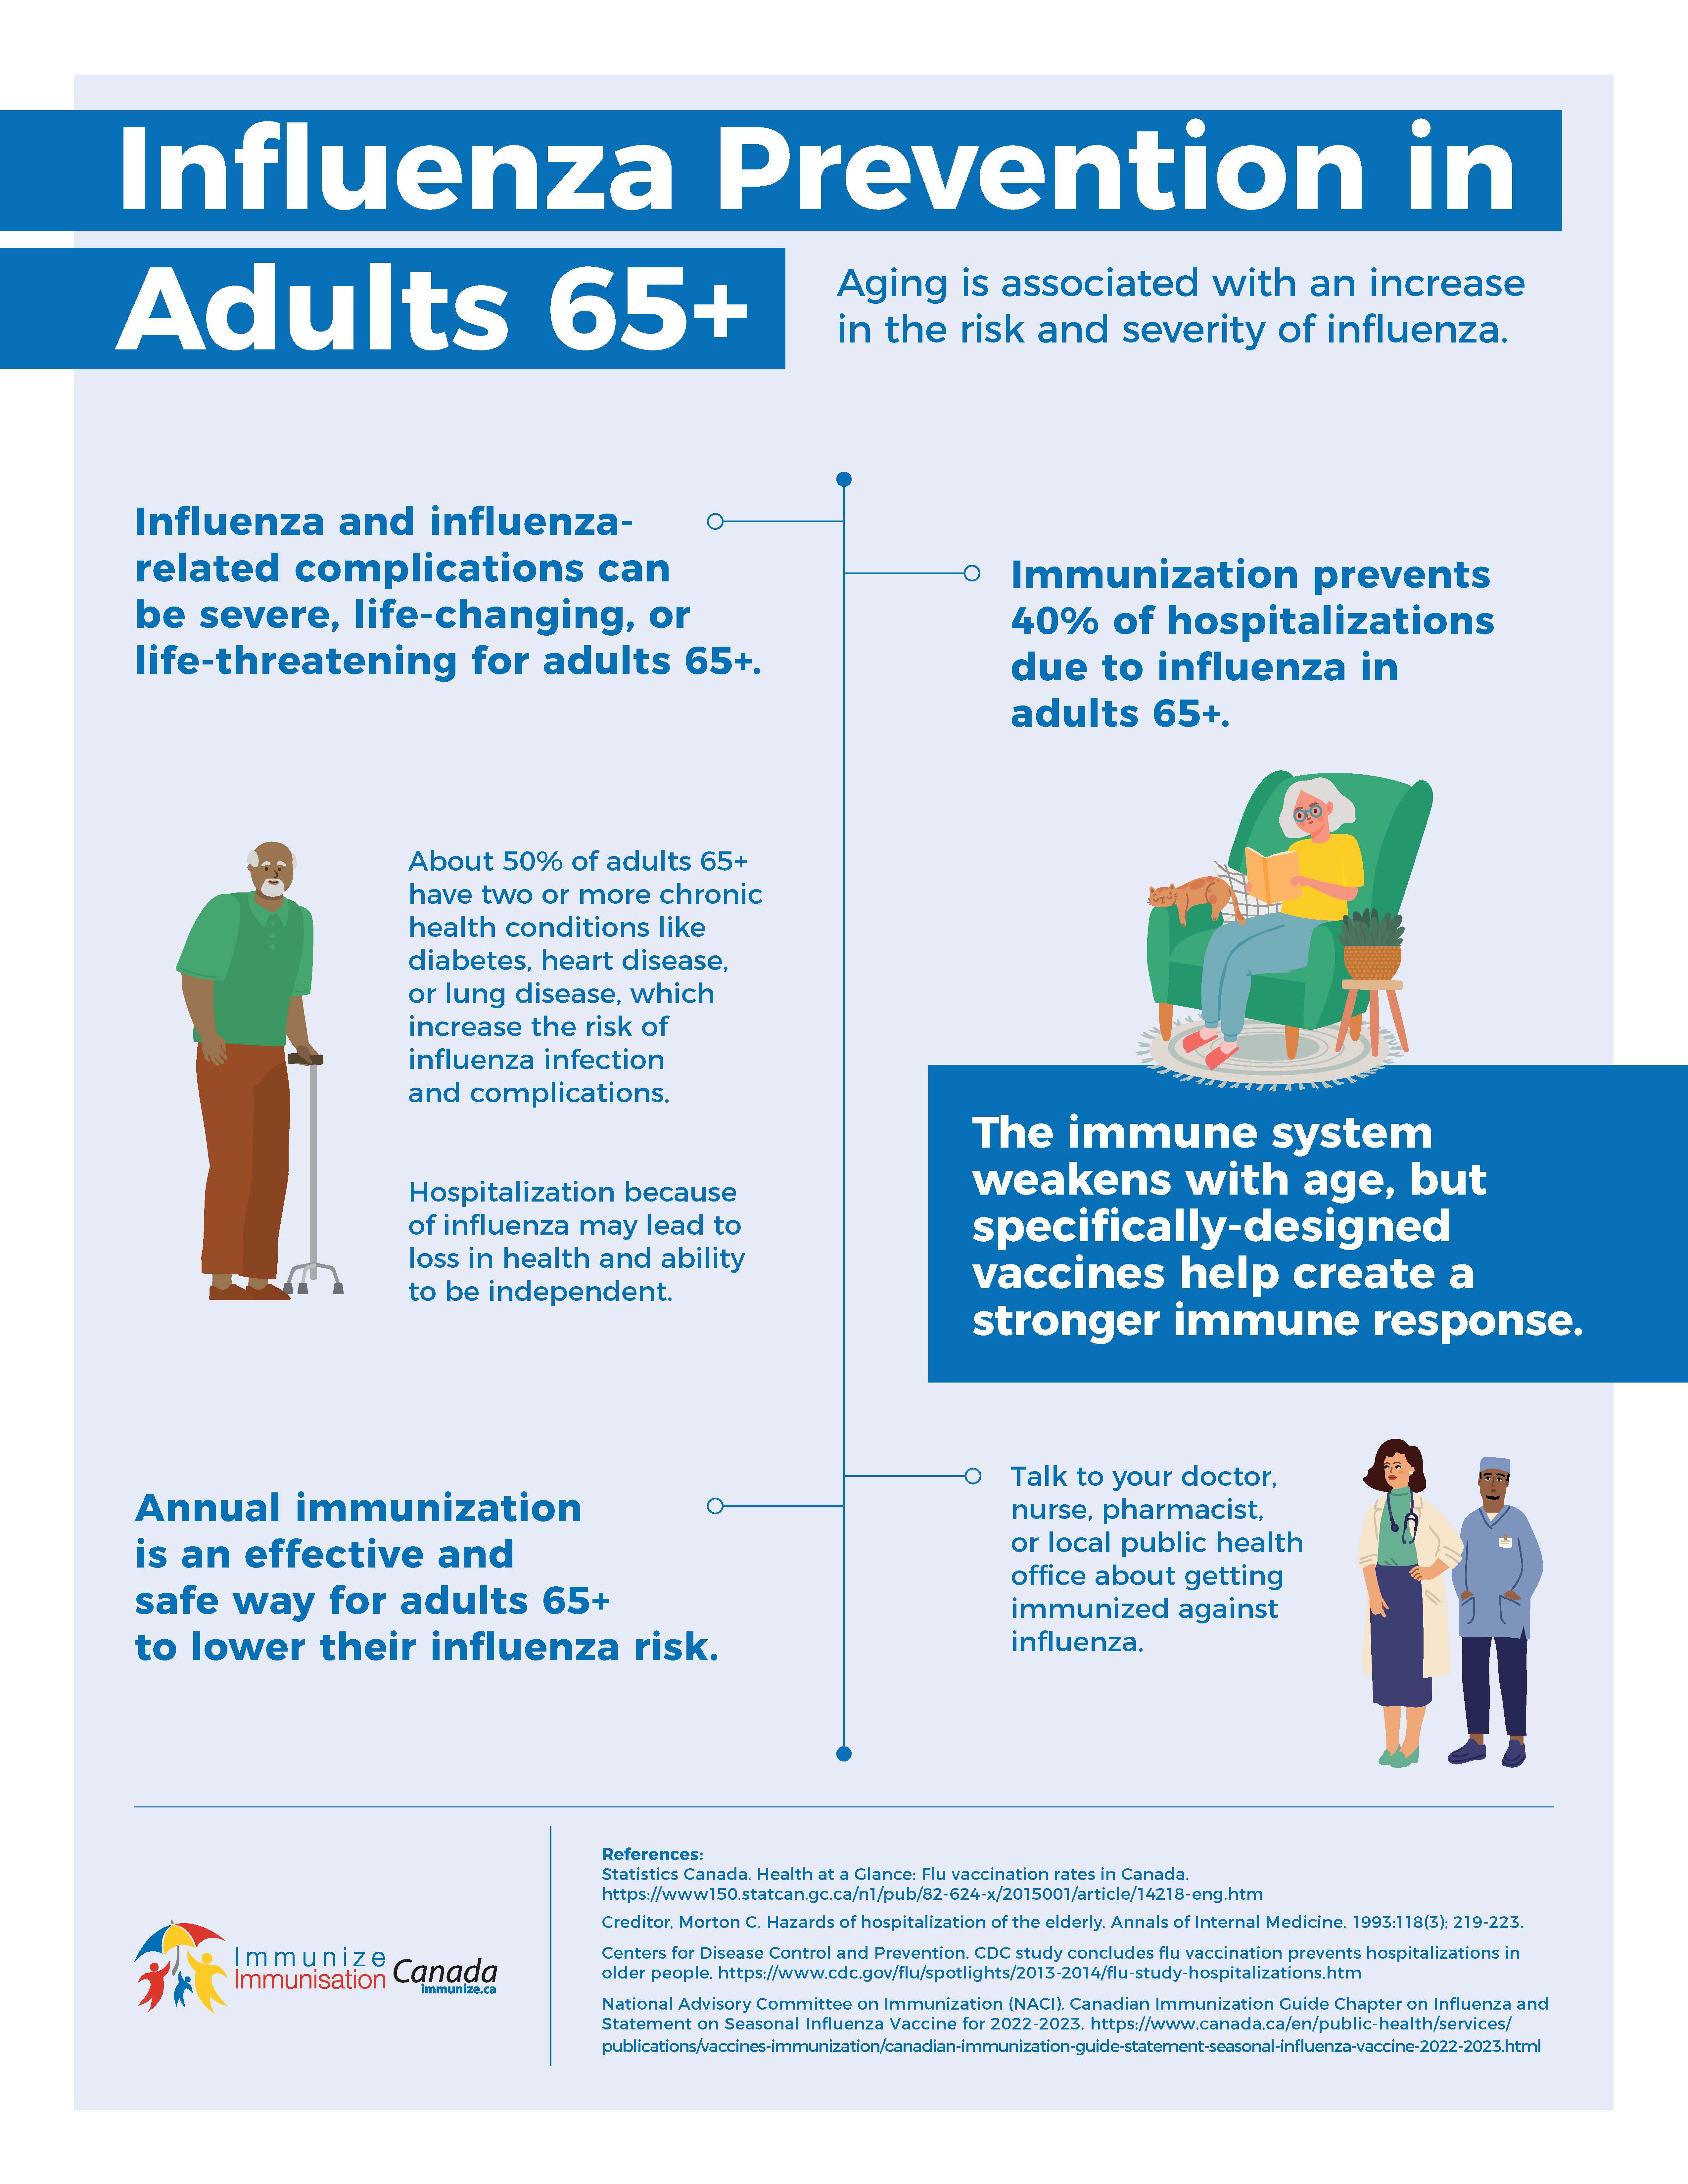 Influenza prevention in adults 65 plus - infographic